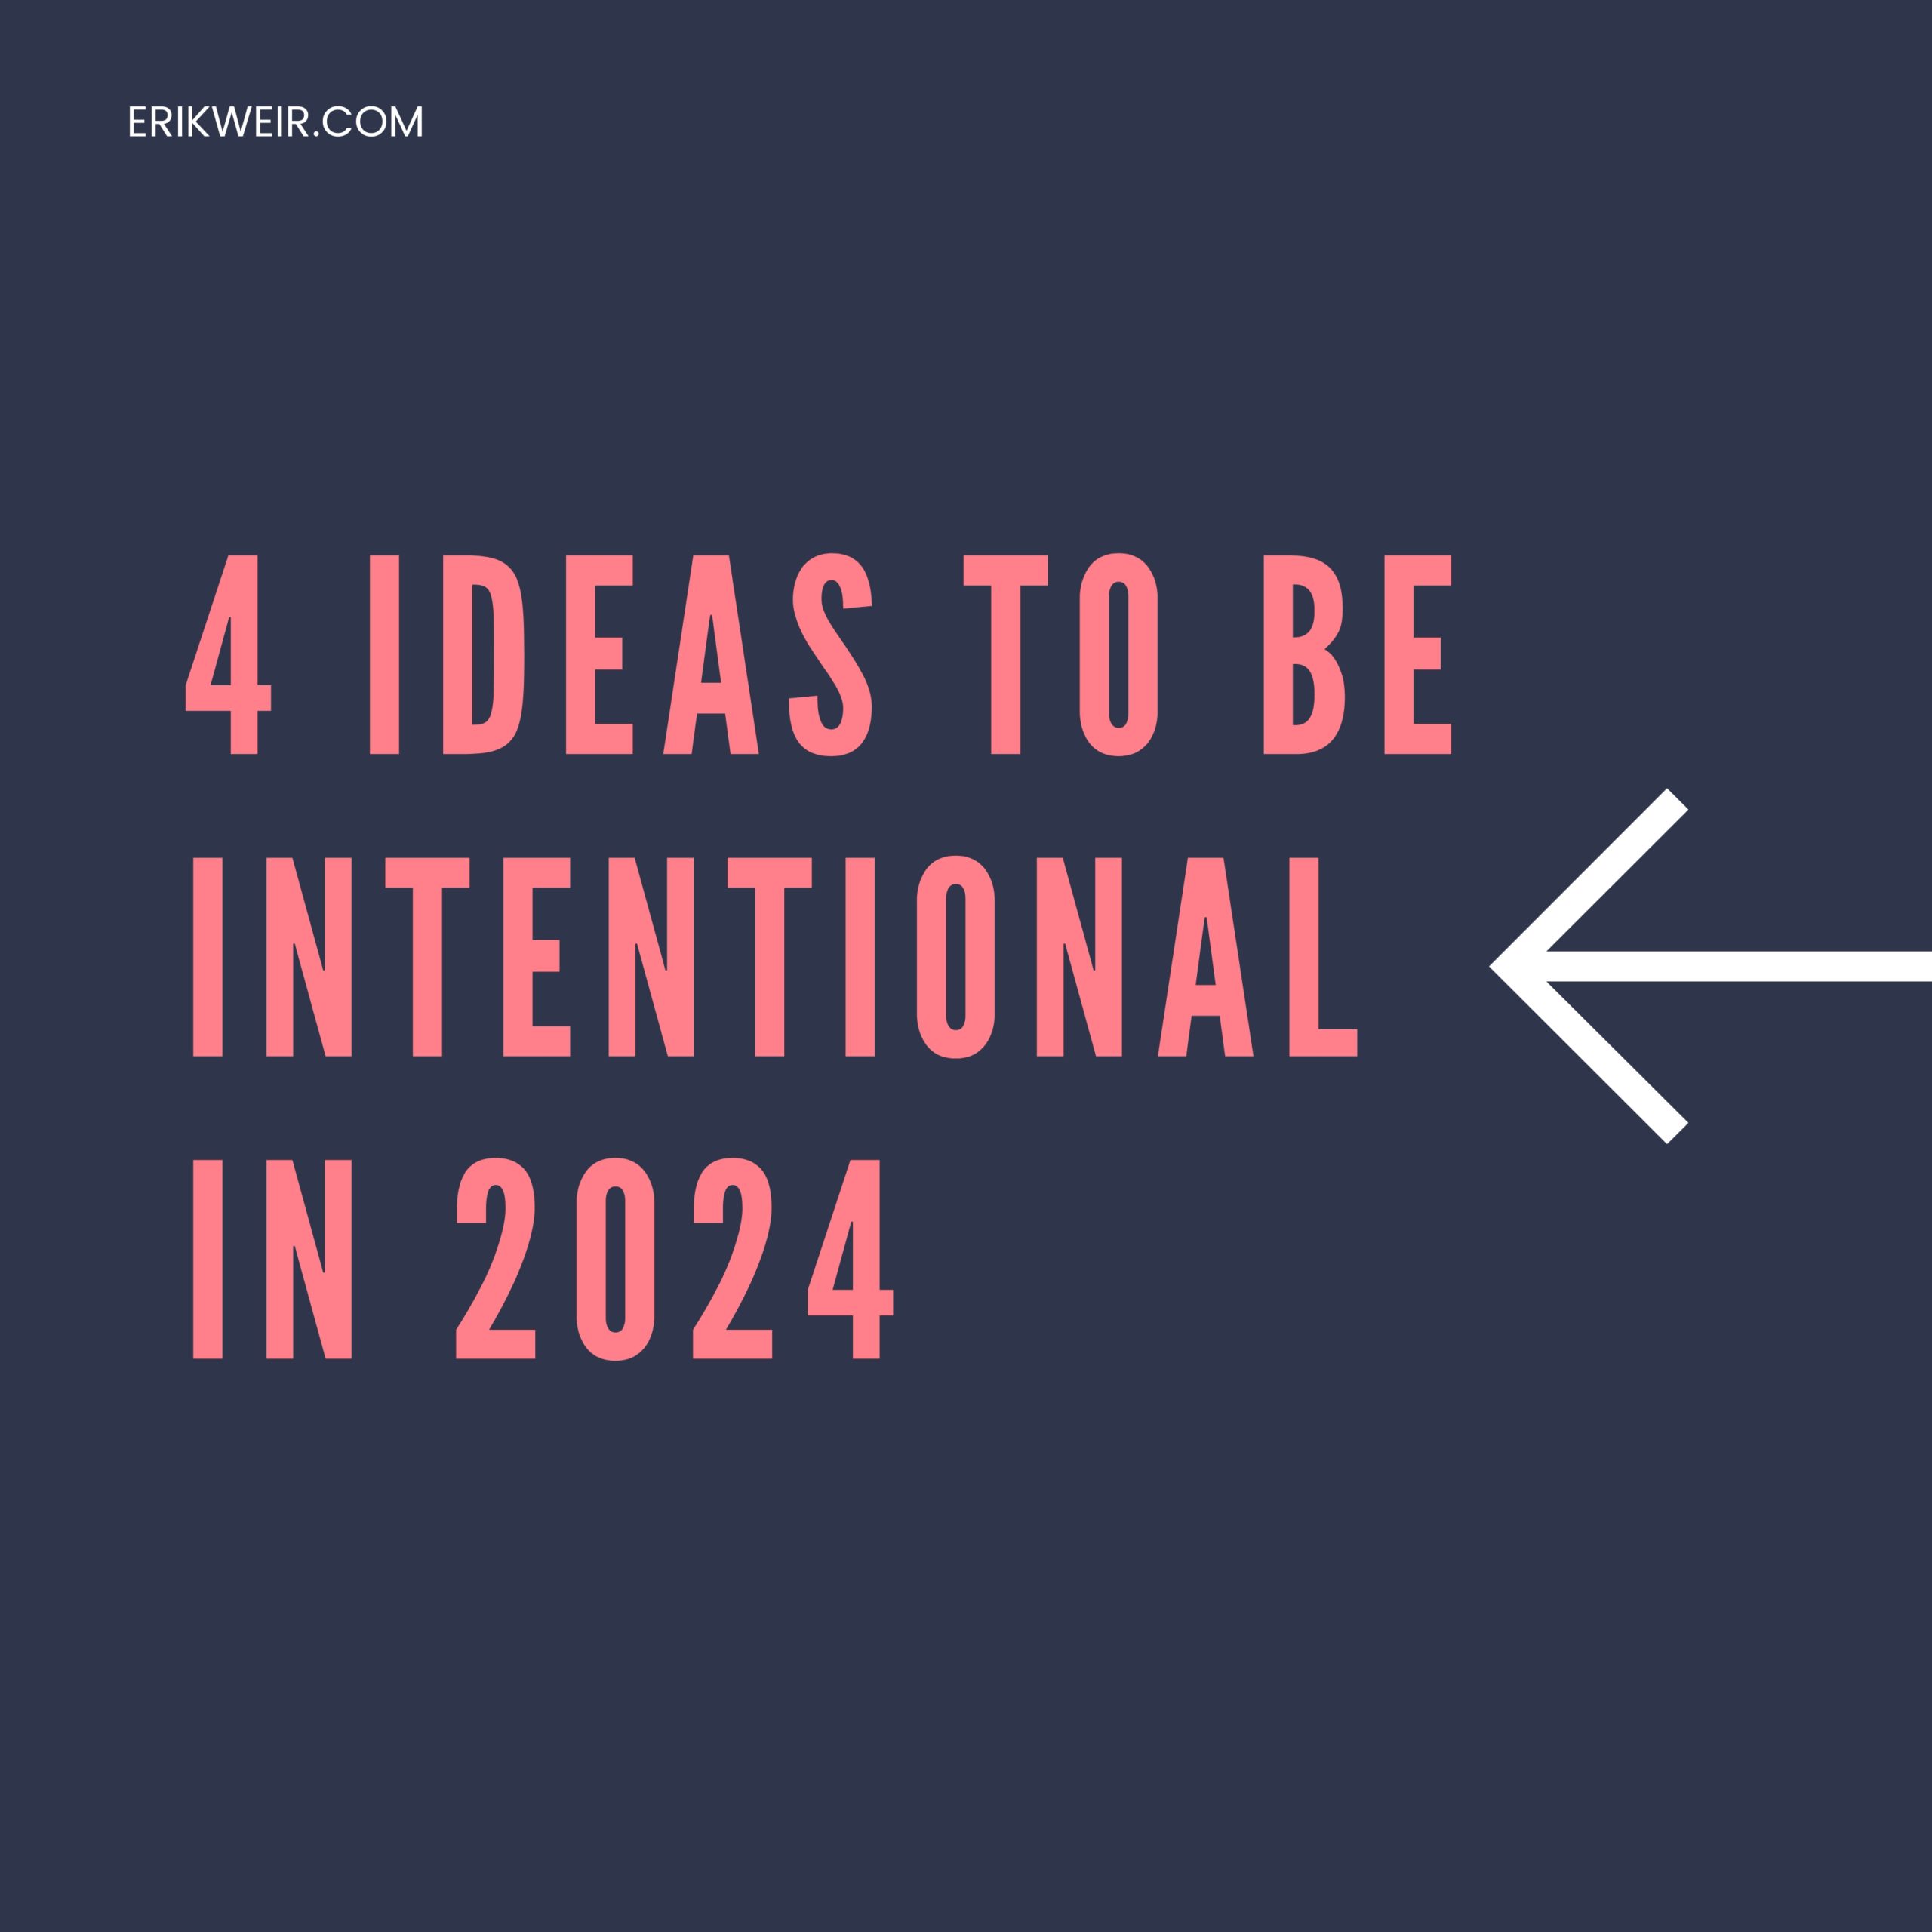 Be Intentional in 2024